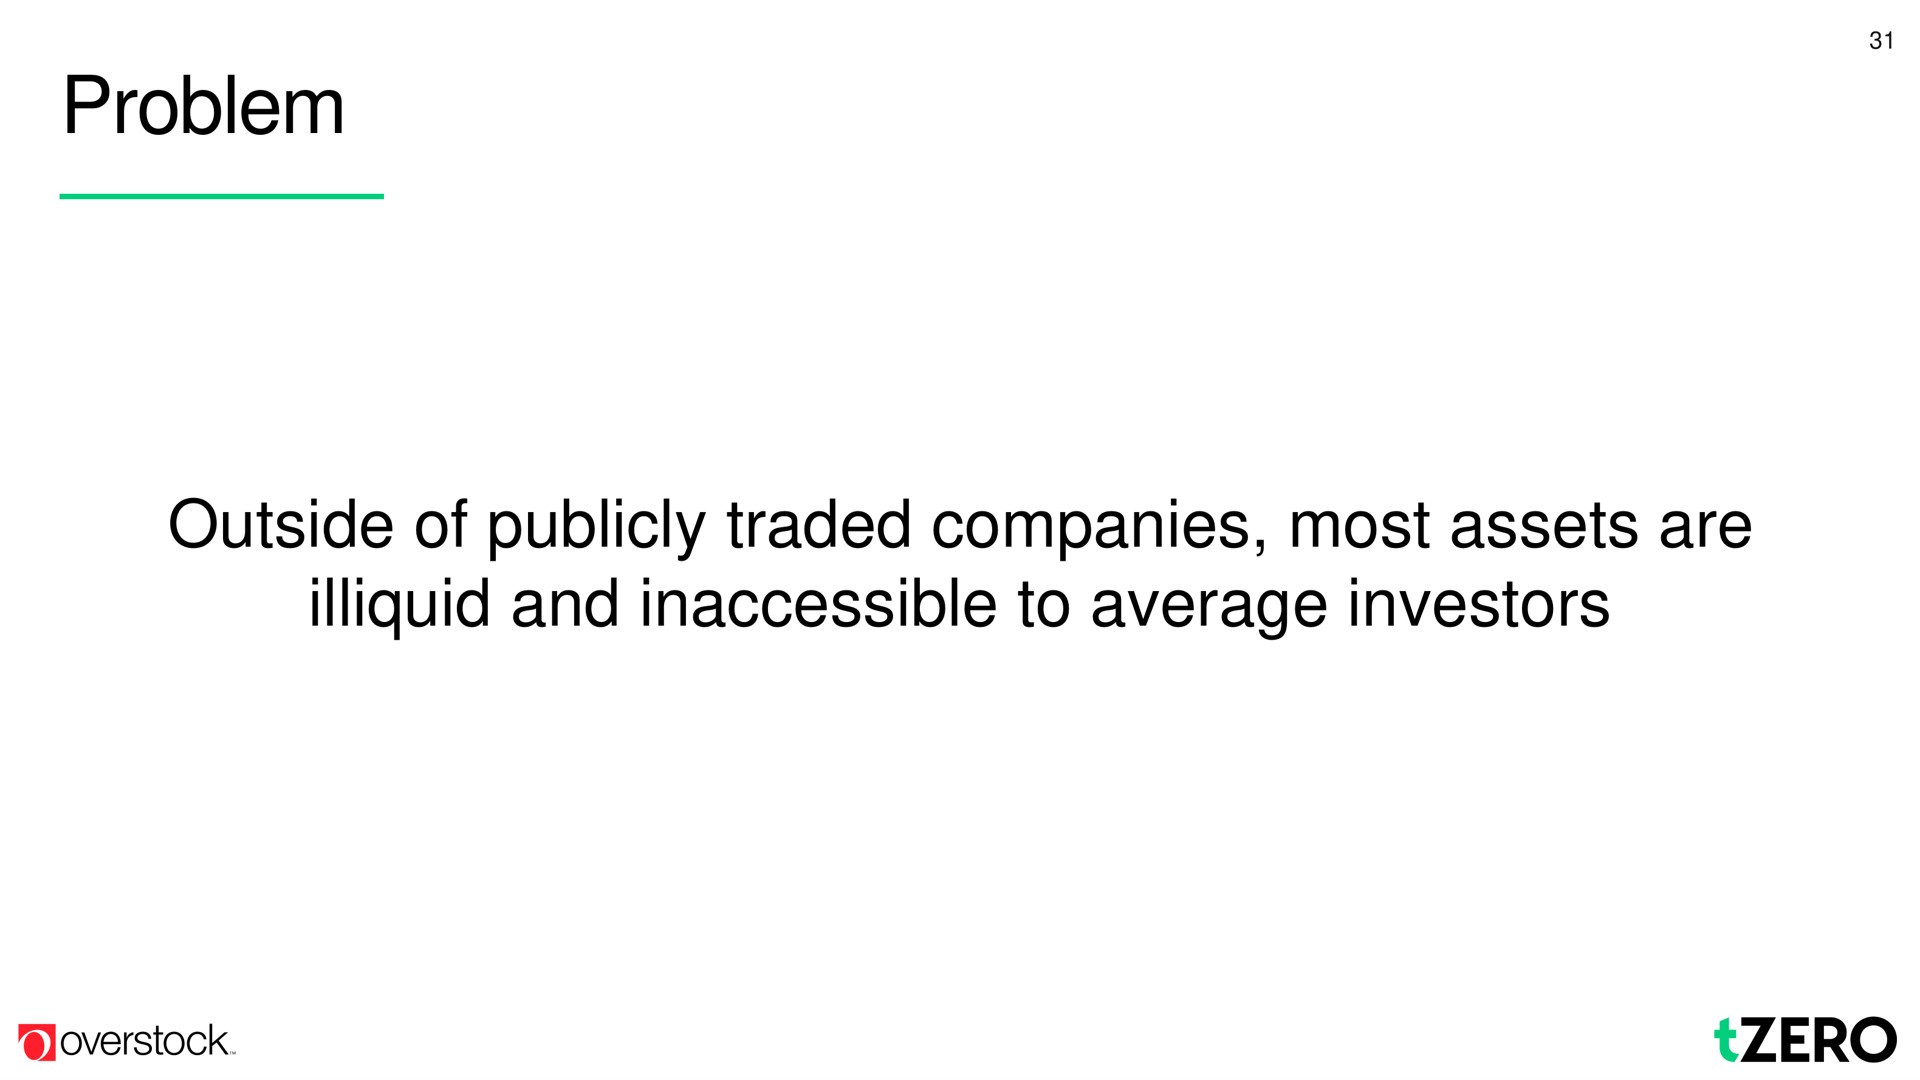 problem outside of publicly traded companies most assets are illiquid and inaccessible to average investors | Overstock